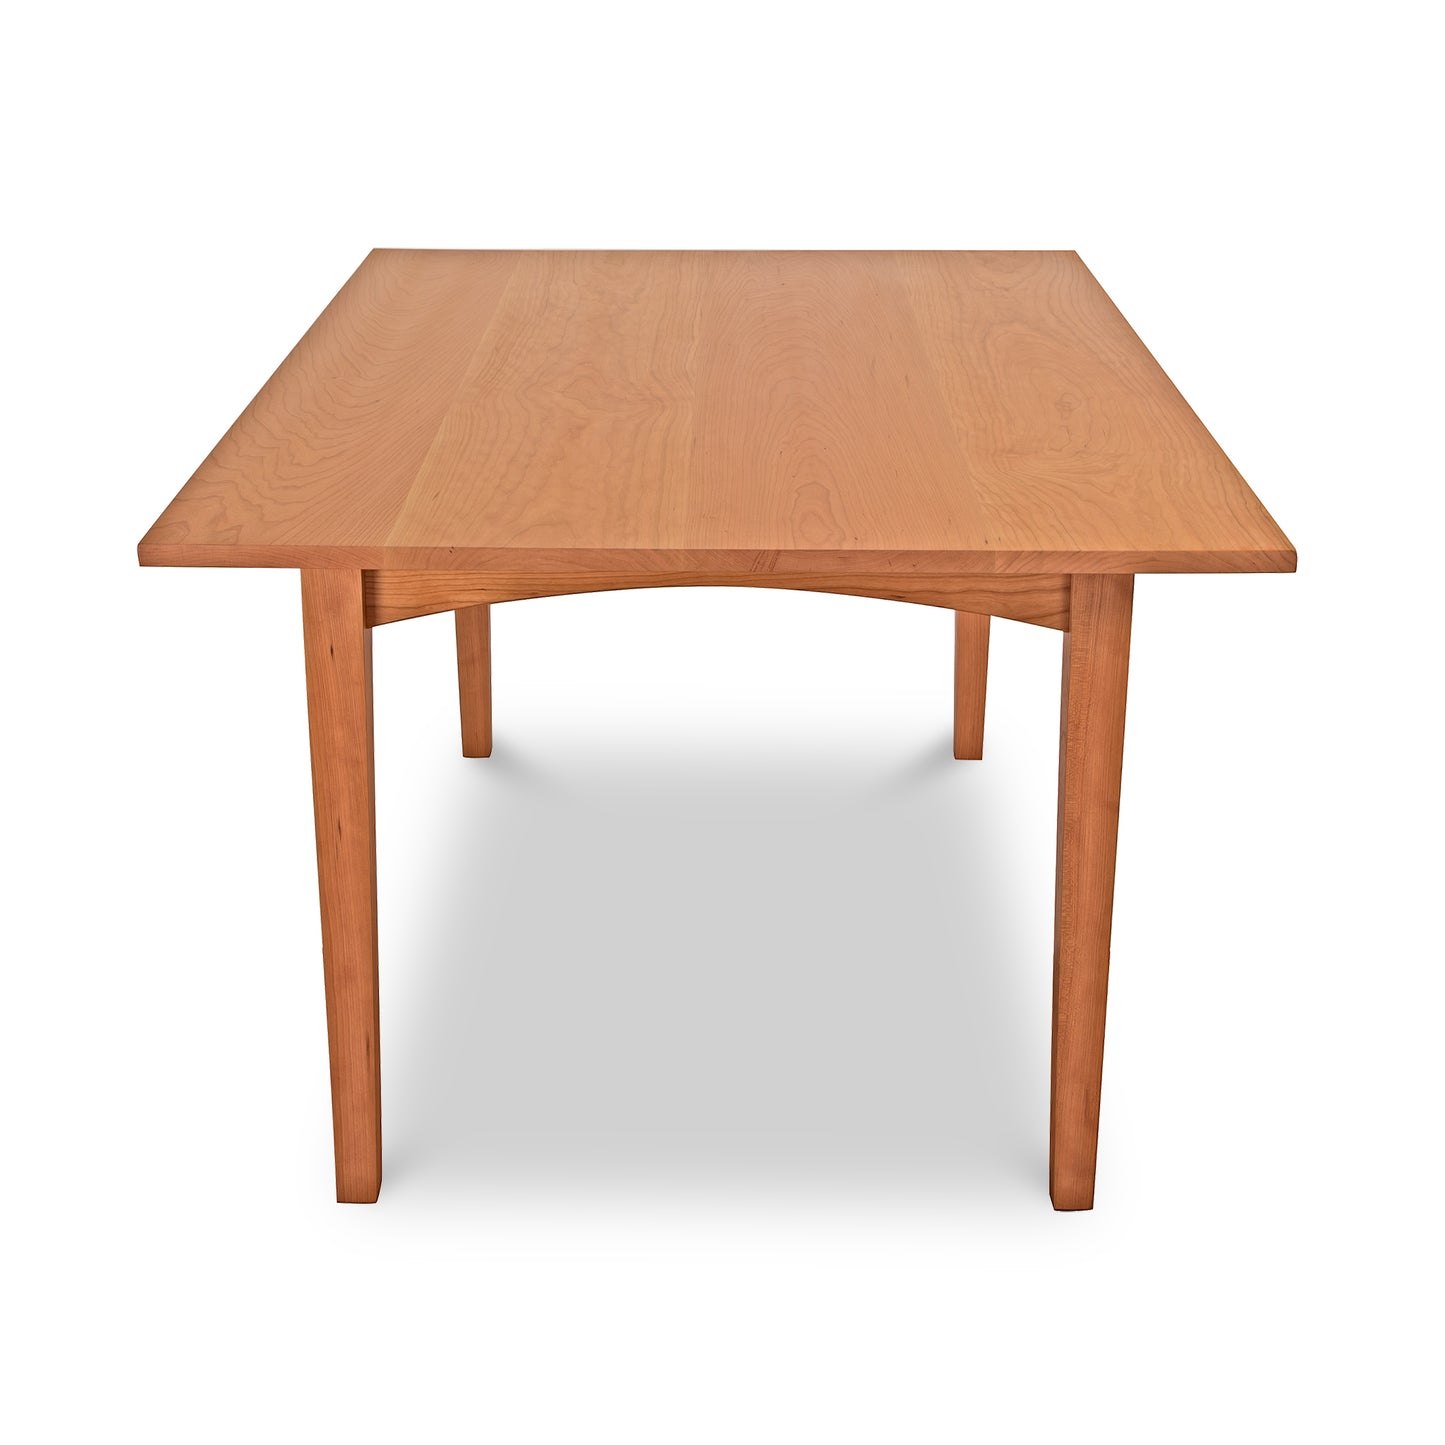 A simple Maple Corner Woodworks American Shaker Rectangular Solid Top Table with a smooth finish and four sturdy legs, isolated on a white background.